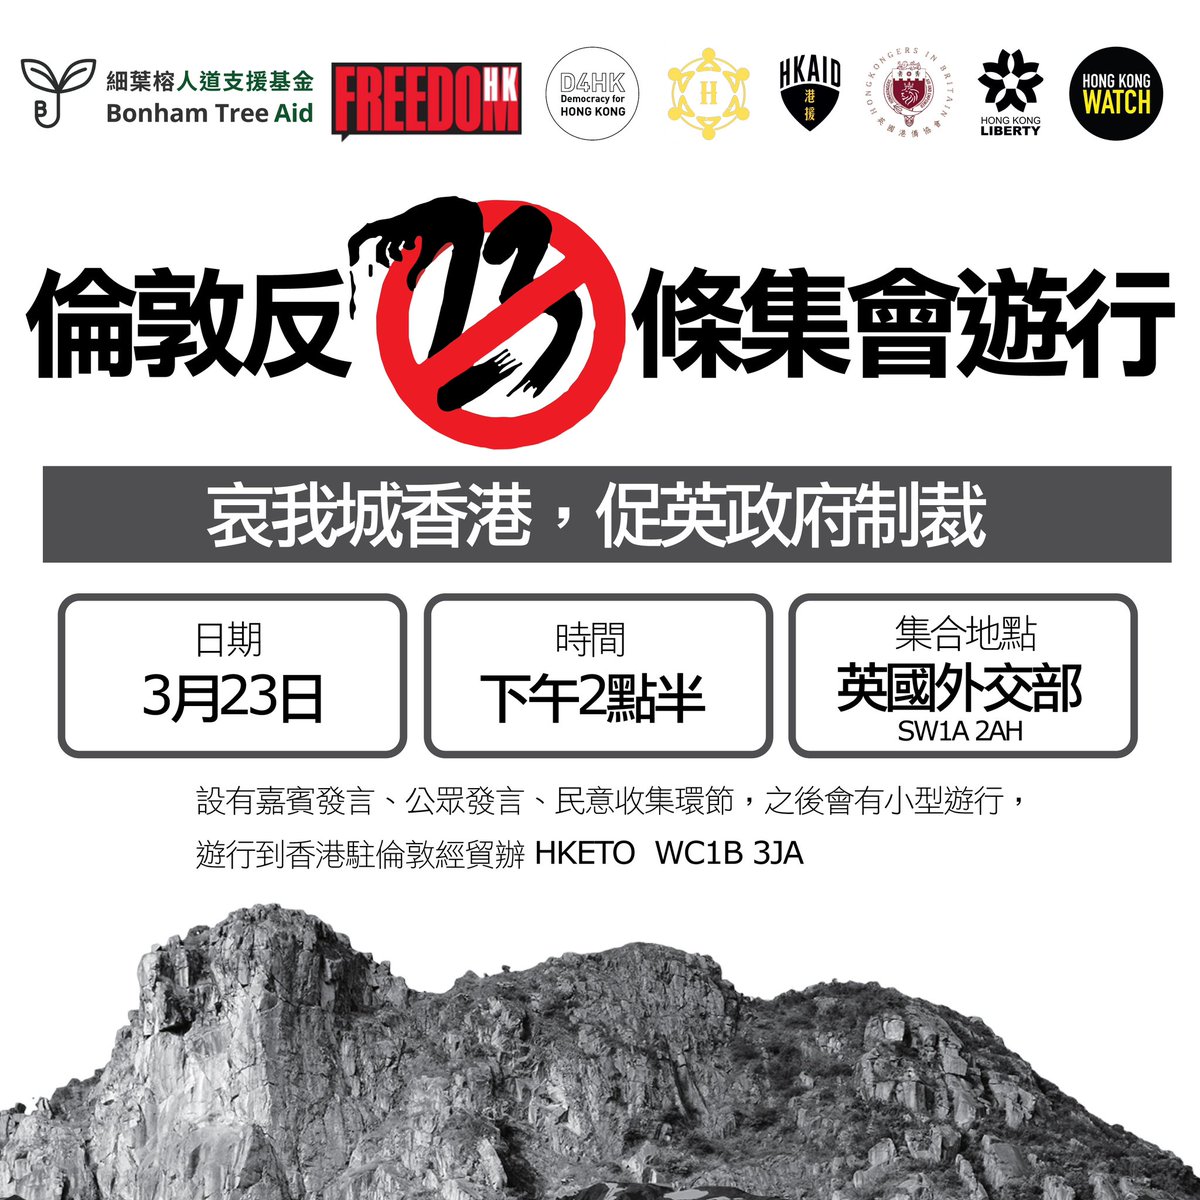 London Rally opposing #Article23 23 March 14:30 From FCDO to HKETO SEE YOU THERE! 要驚一齊驚，一齊戰勝恐懼！